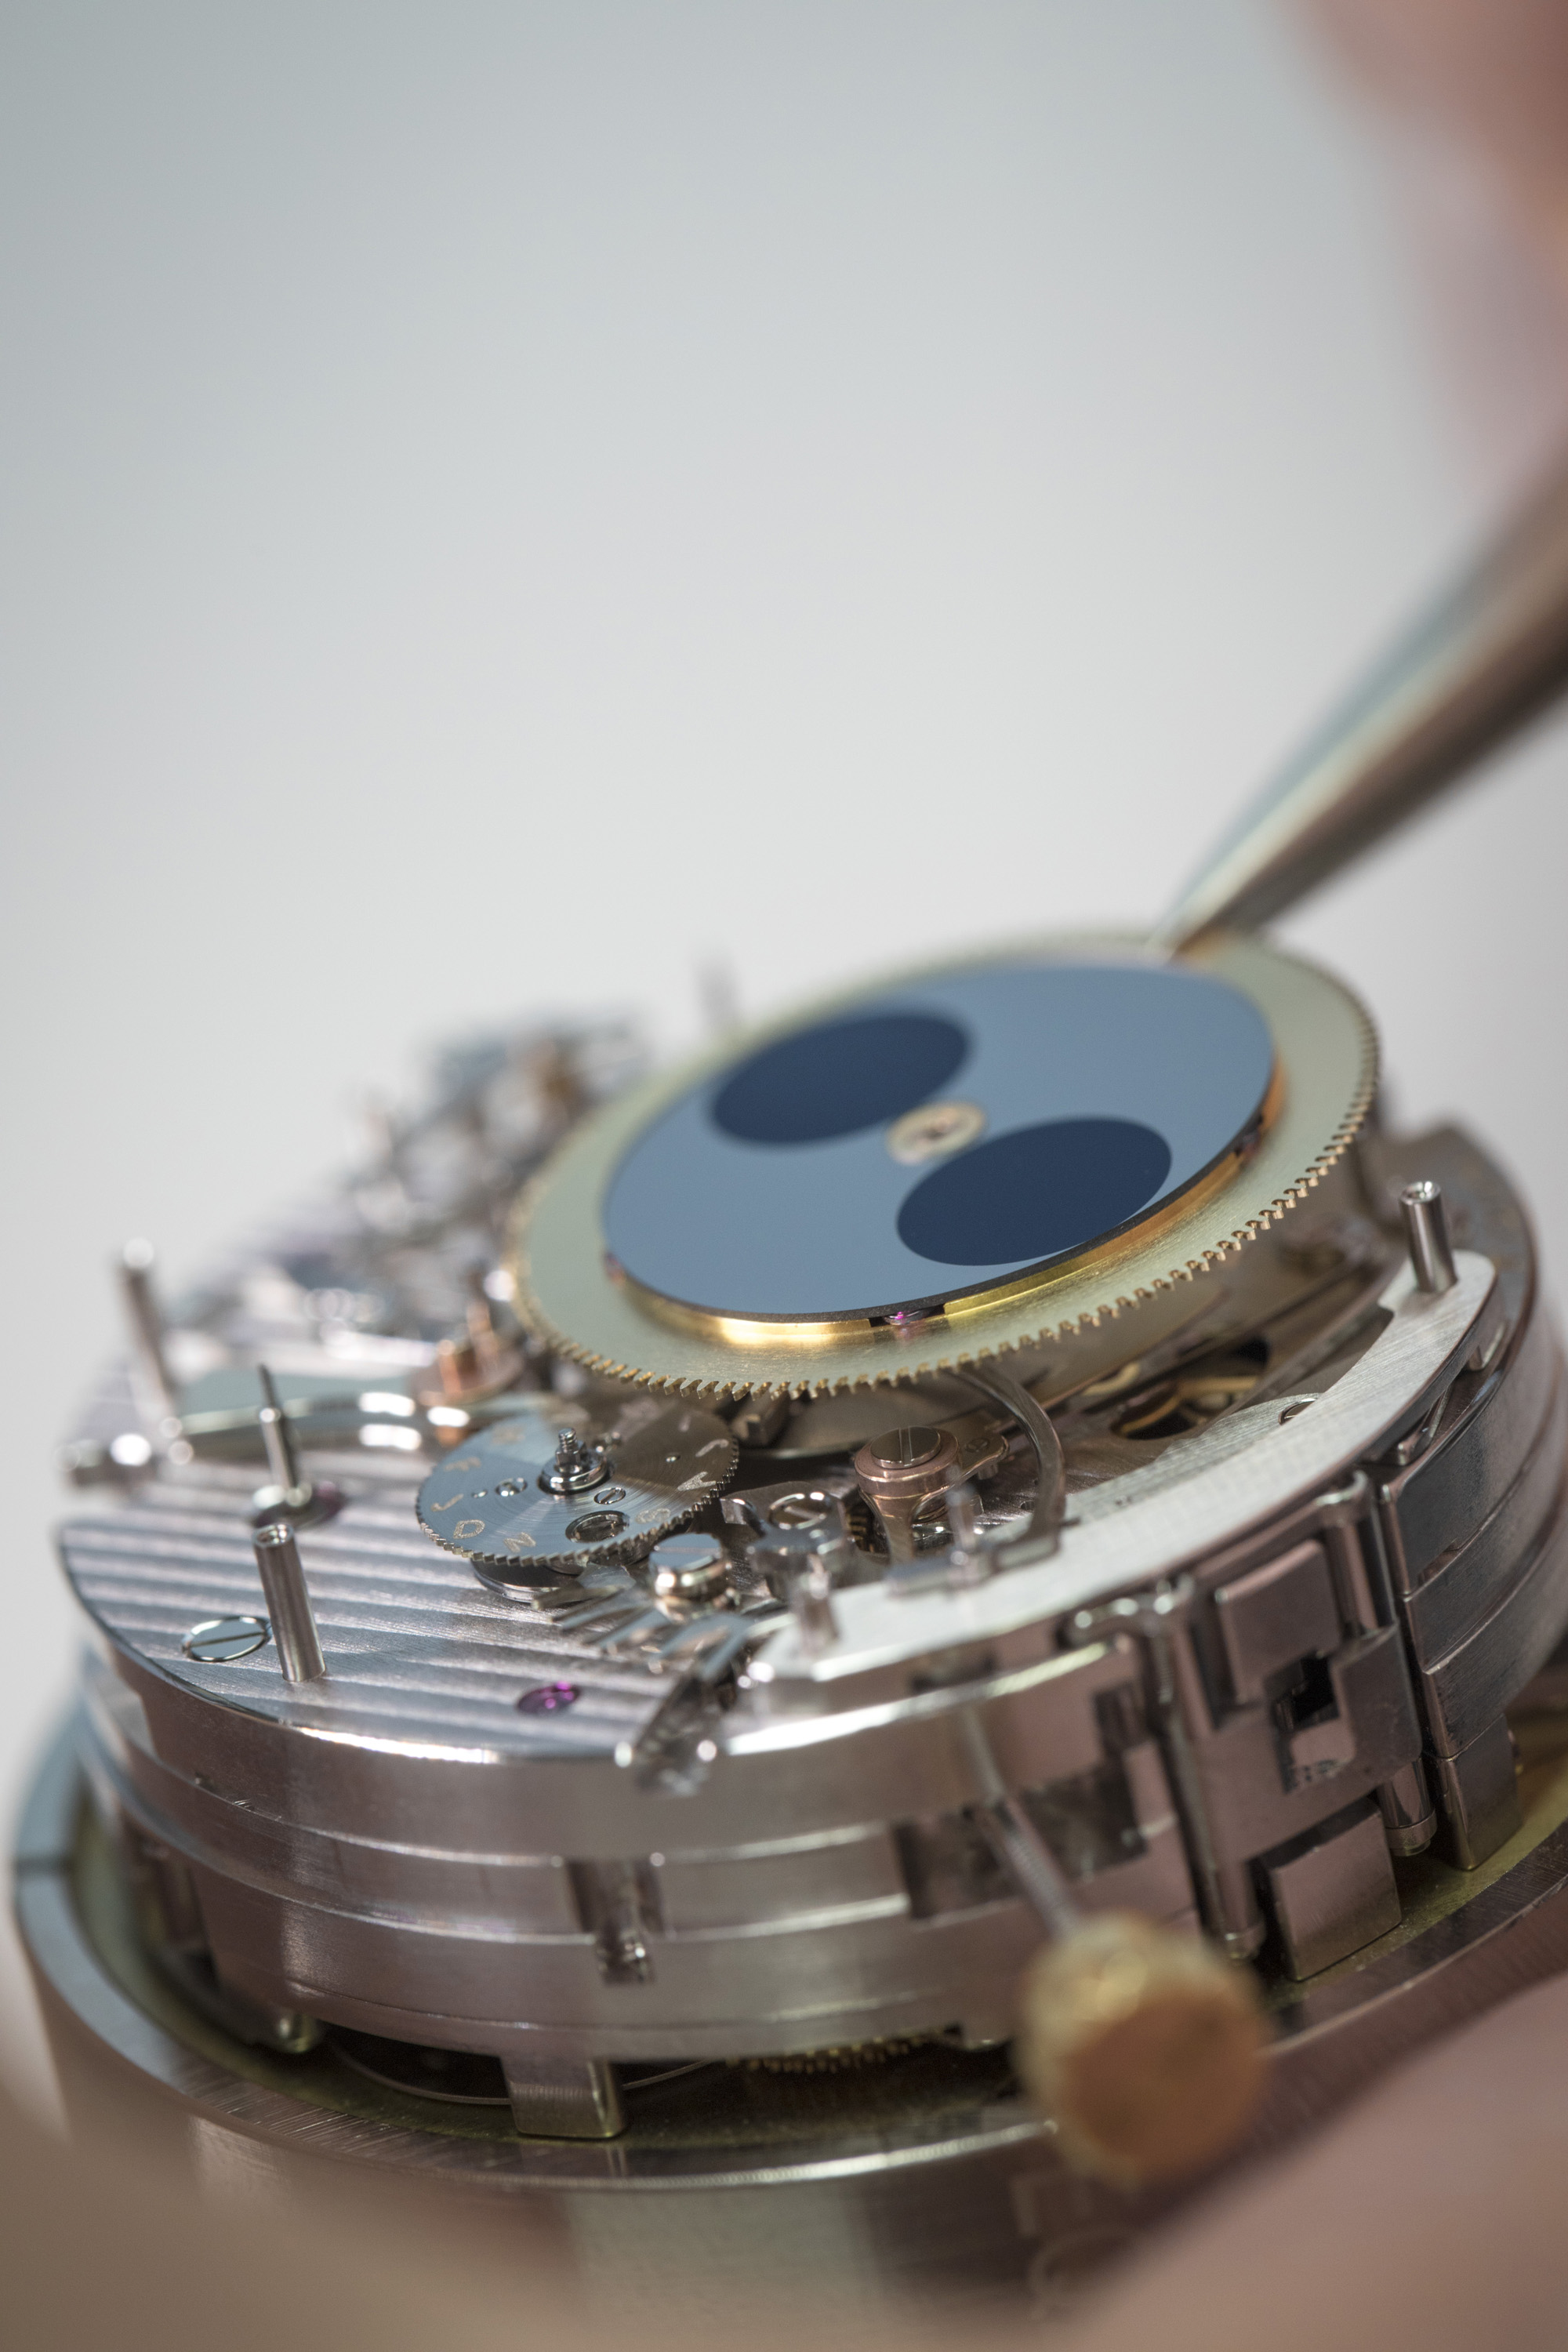 The moon phase wheel disk is set on the movement